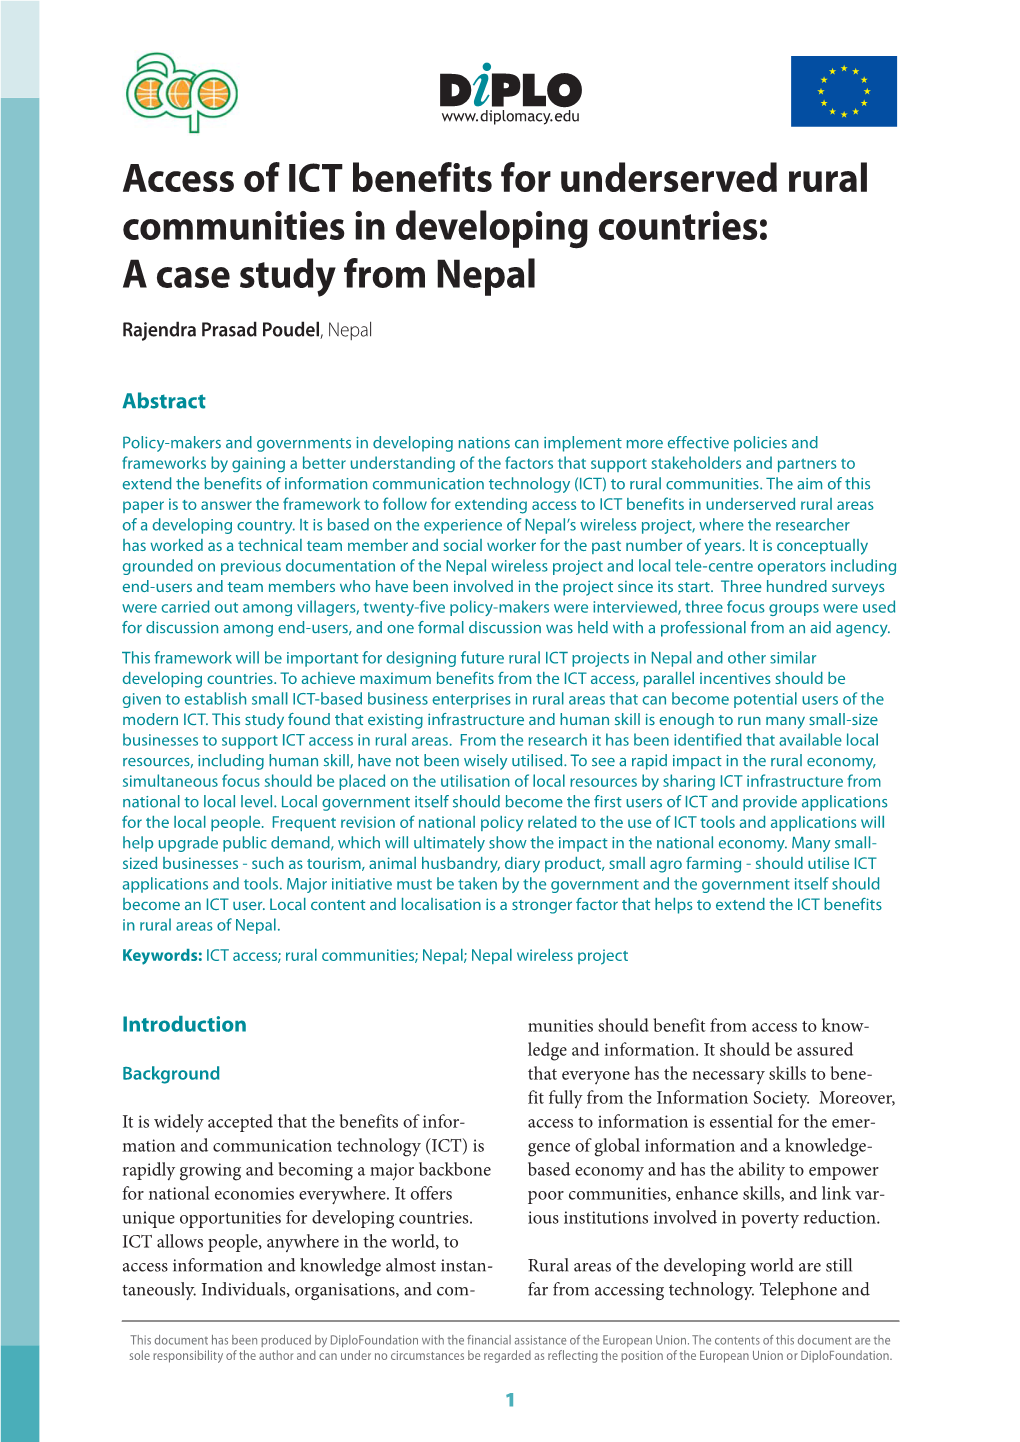 Access of ICT Benefits for Underserved Rural Communities in Developing Countries: a Case Study from Nepal